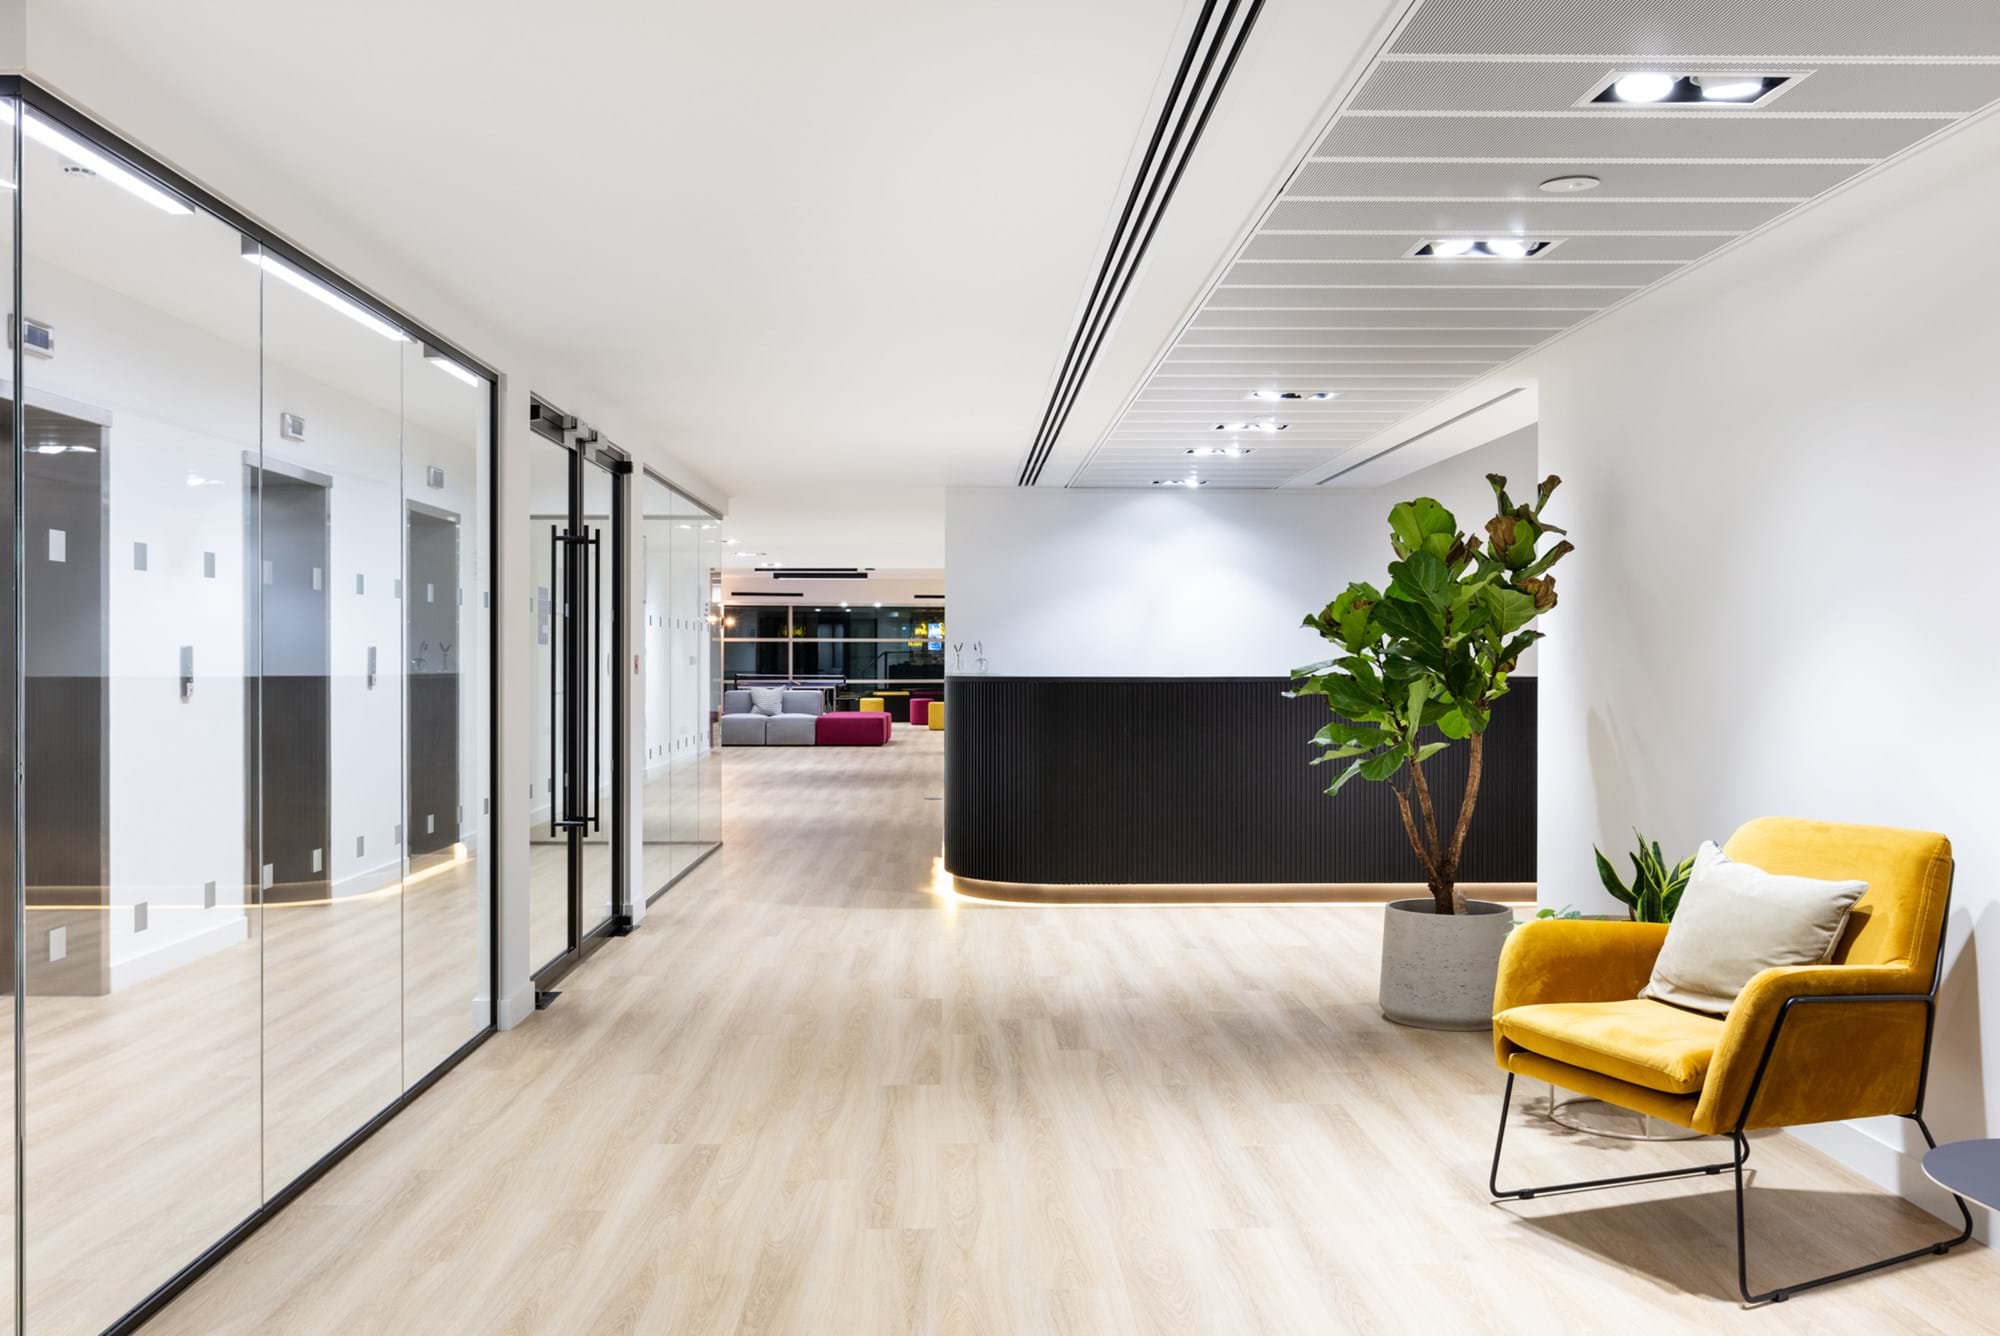 Modus Workspace office design, fit out and refurbishment - Knotel - Modus_Knotel-85.jpg